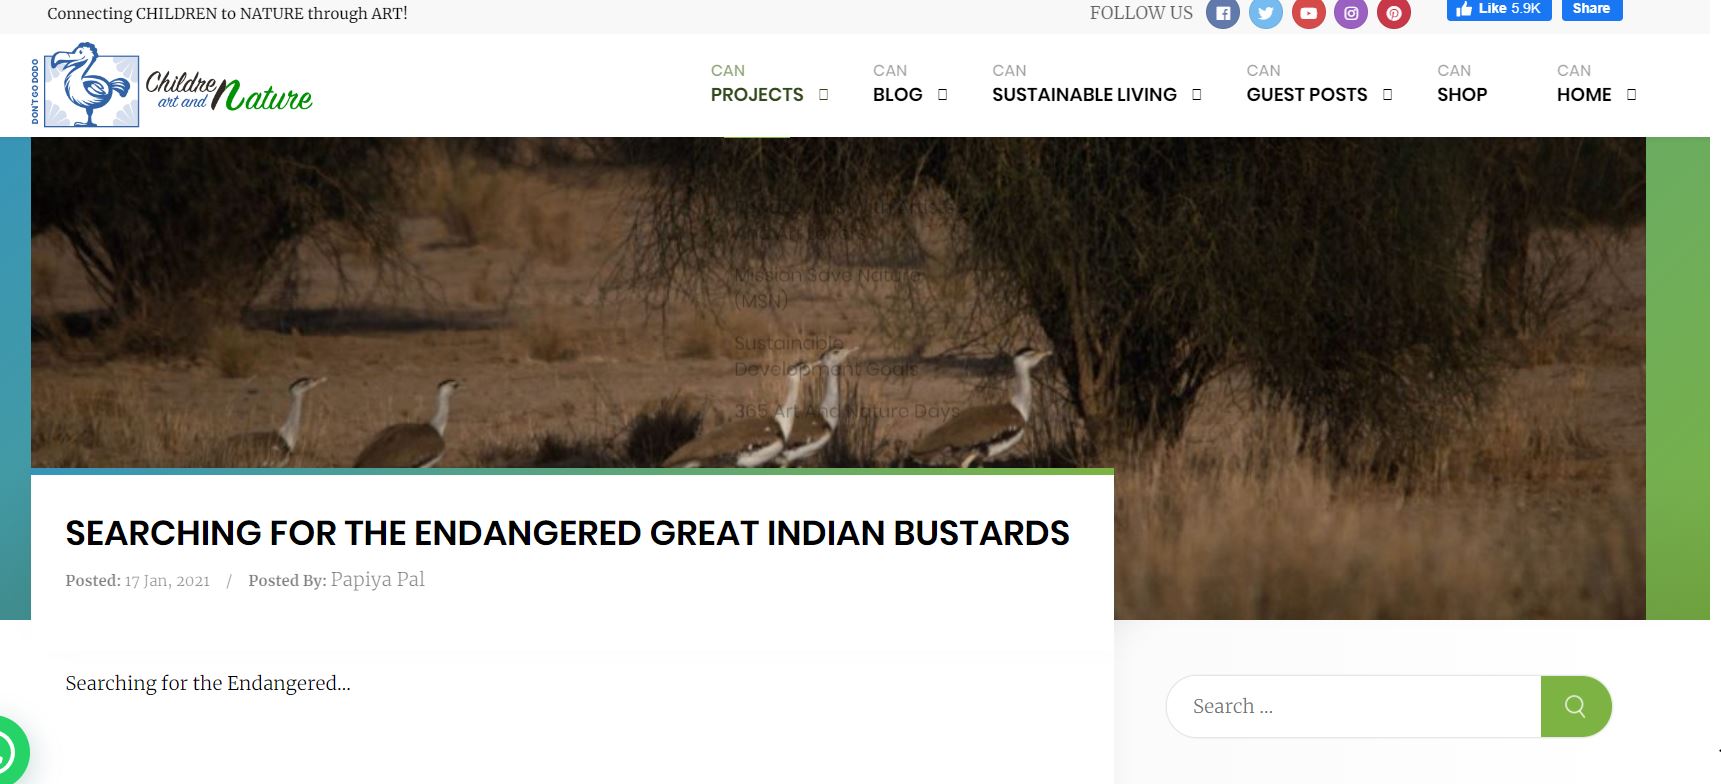 Great Indian Bustard, travel, Indian